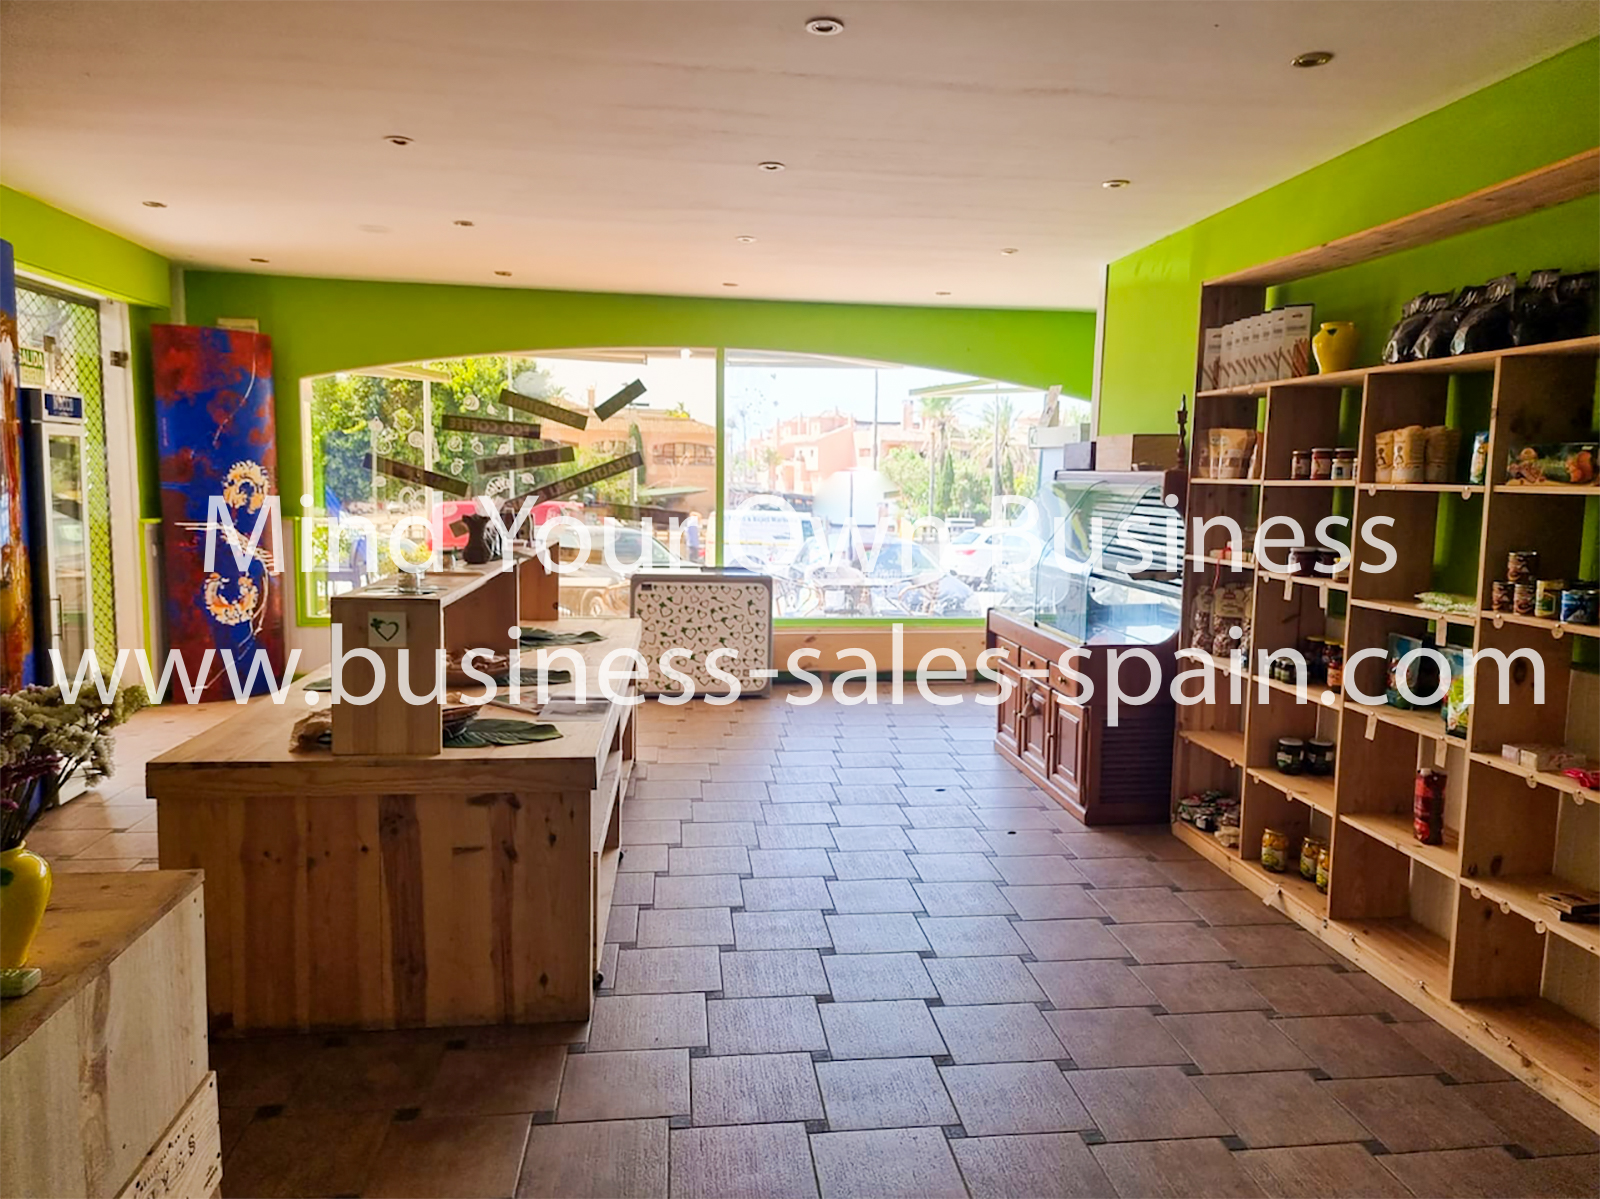 Modern Café Situated In Busy Commercial Centre Between San Pedro And Estepona.